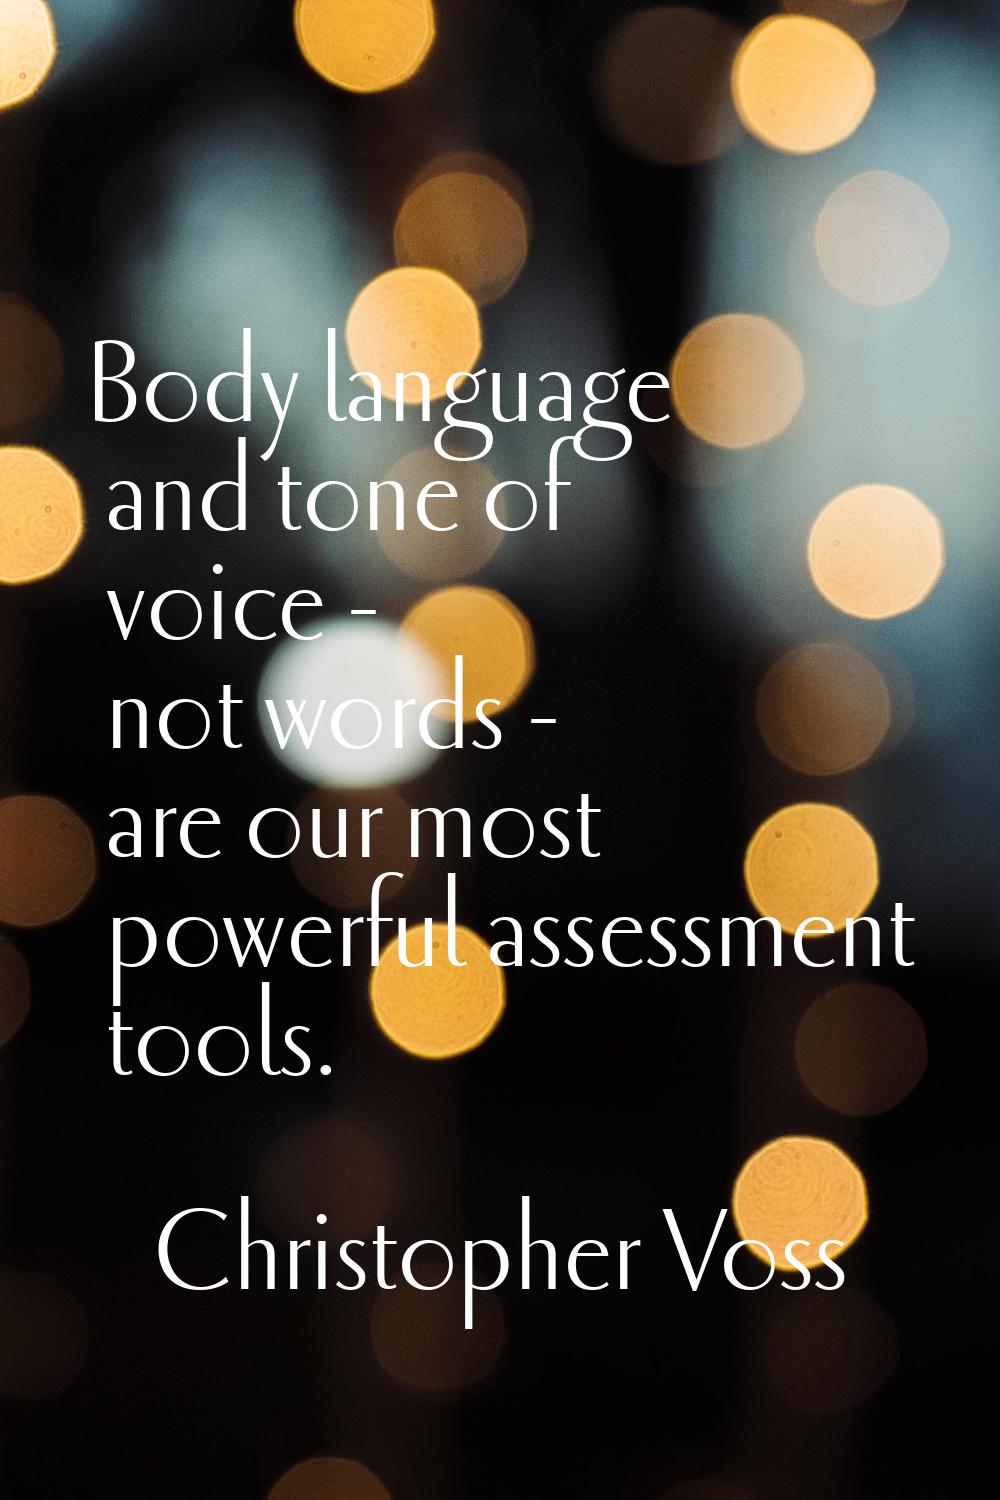 Body language and tone of voice - not words - are our most powerful assessment tools.